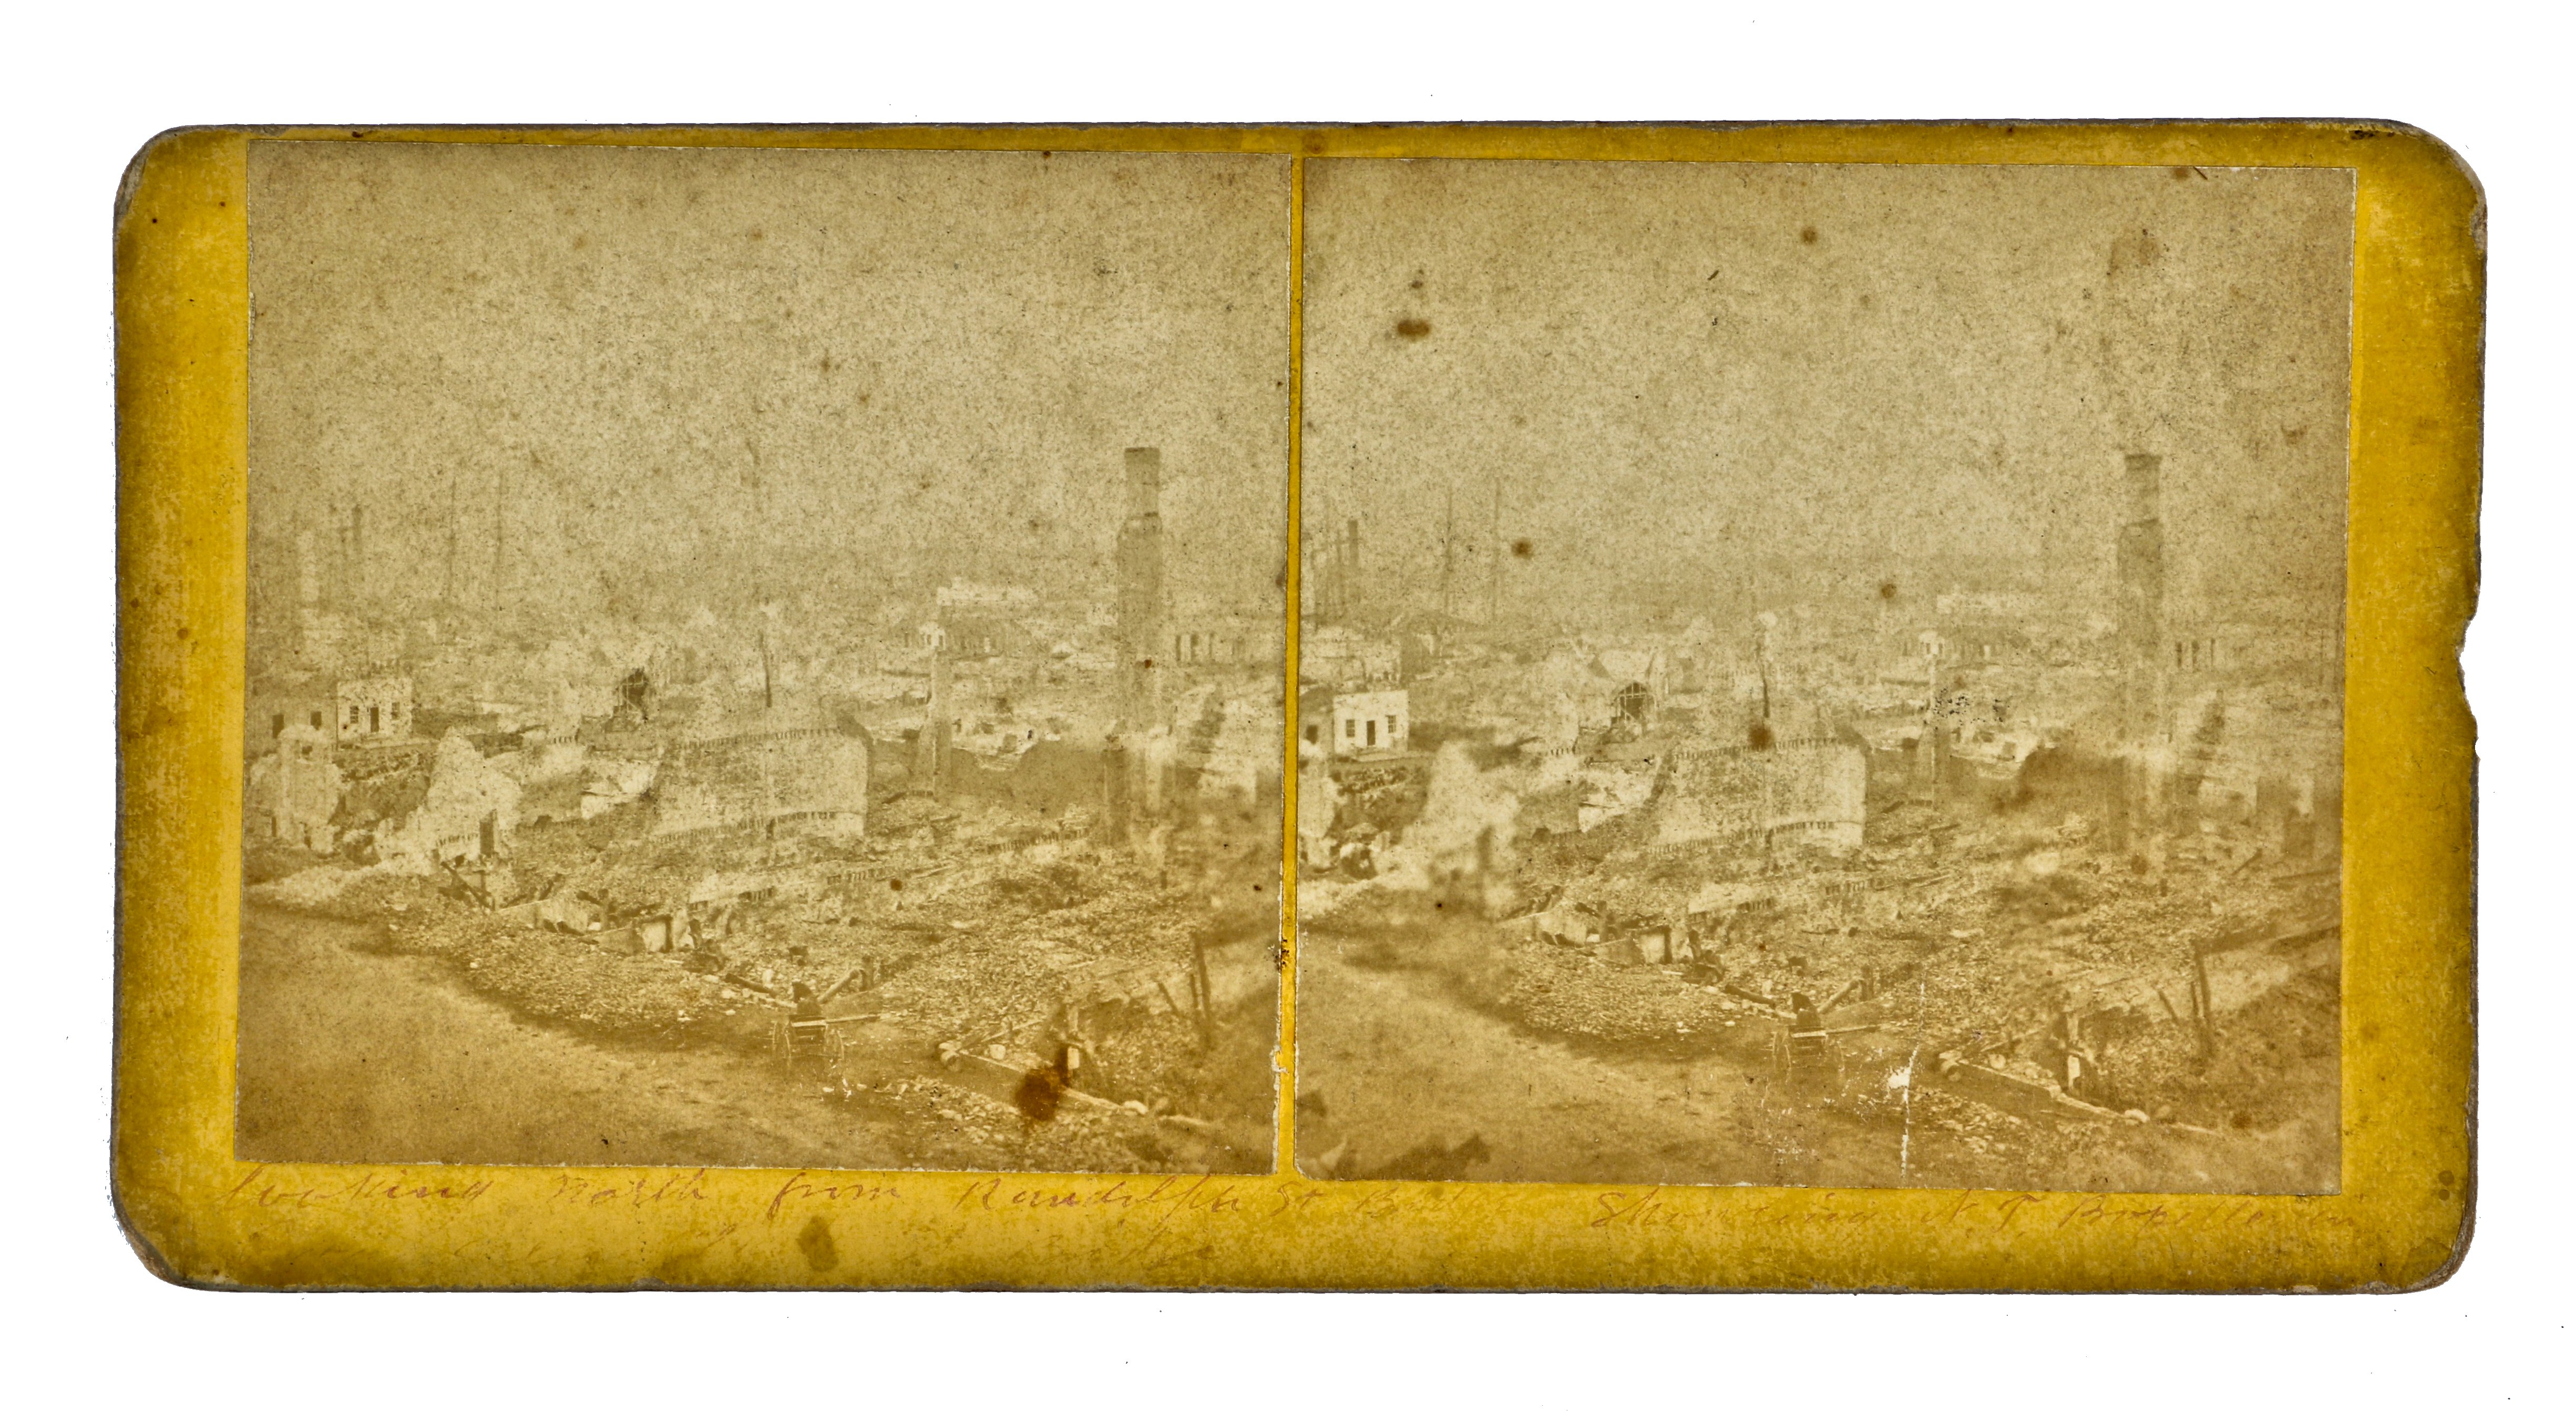 original all original and intact october 1871 great chicago fire stereograph photographic card with post-chicago fire scene north of randolph street